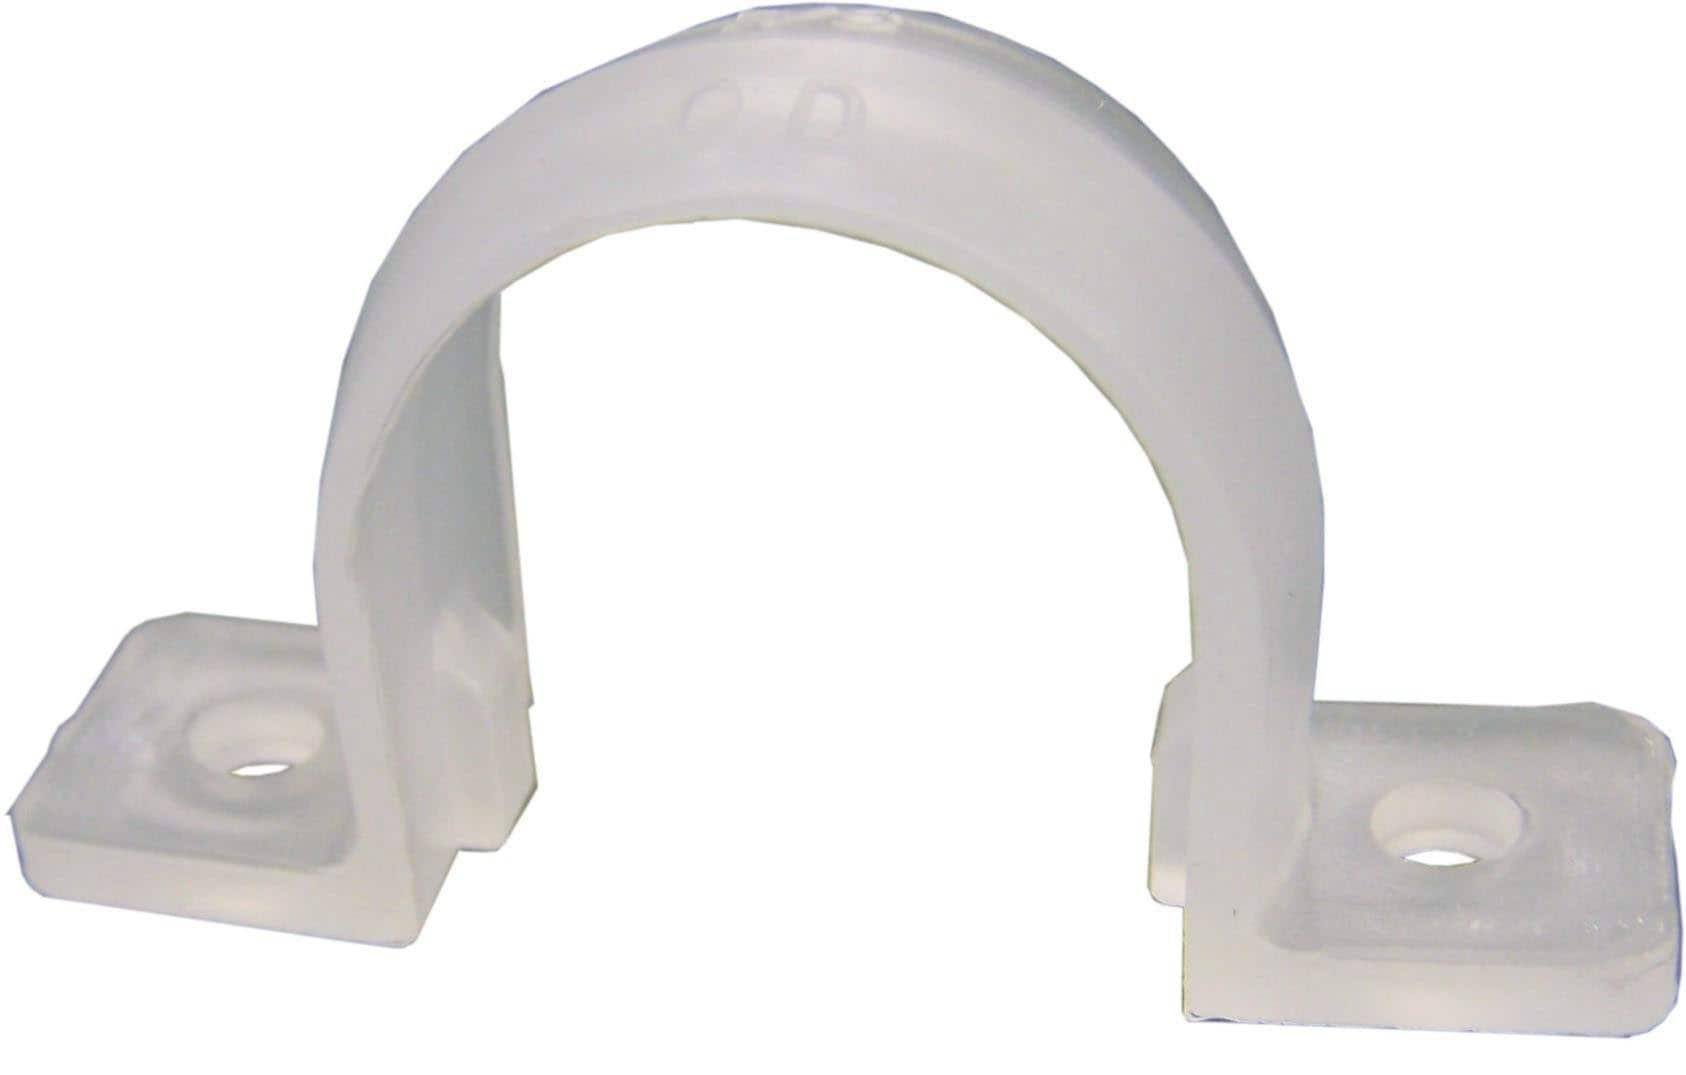 Genova 3/4-in CPVC Tubing strap (5-Pack) at Lowes.com